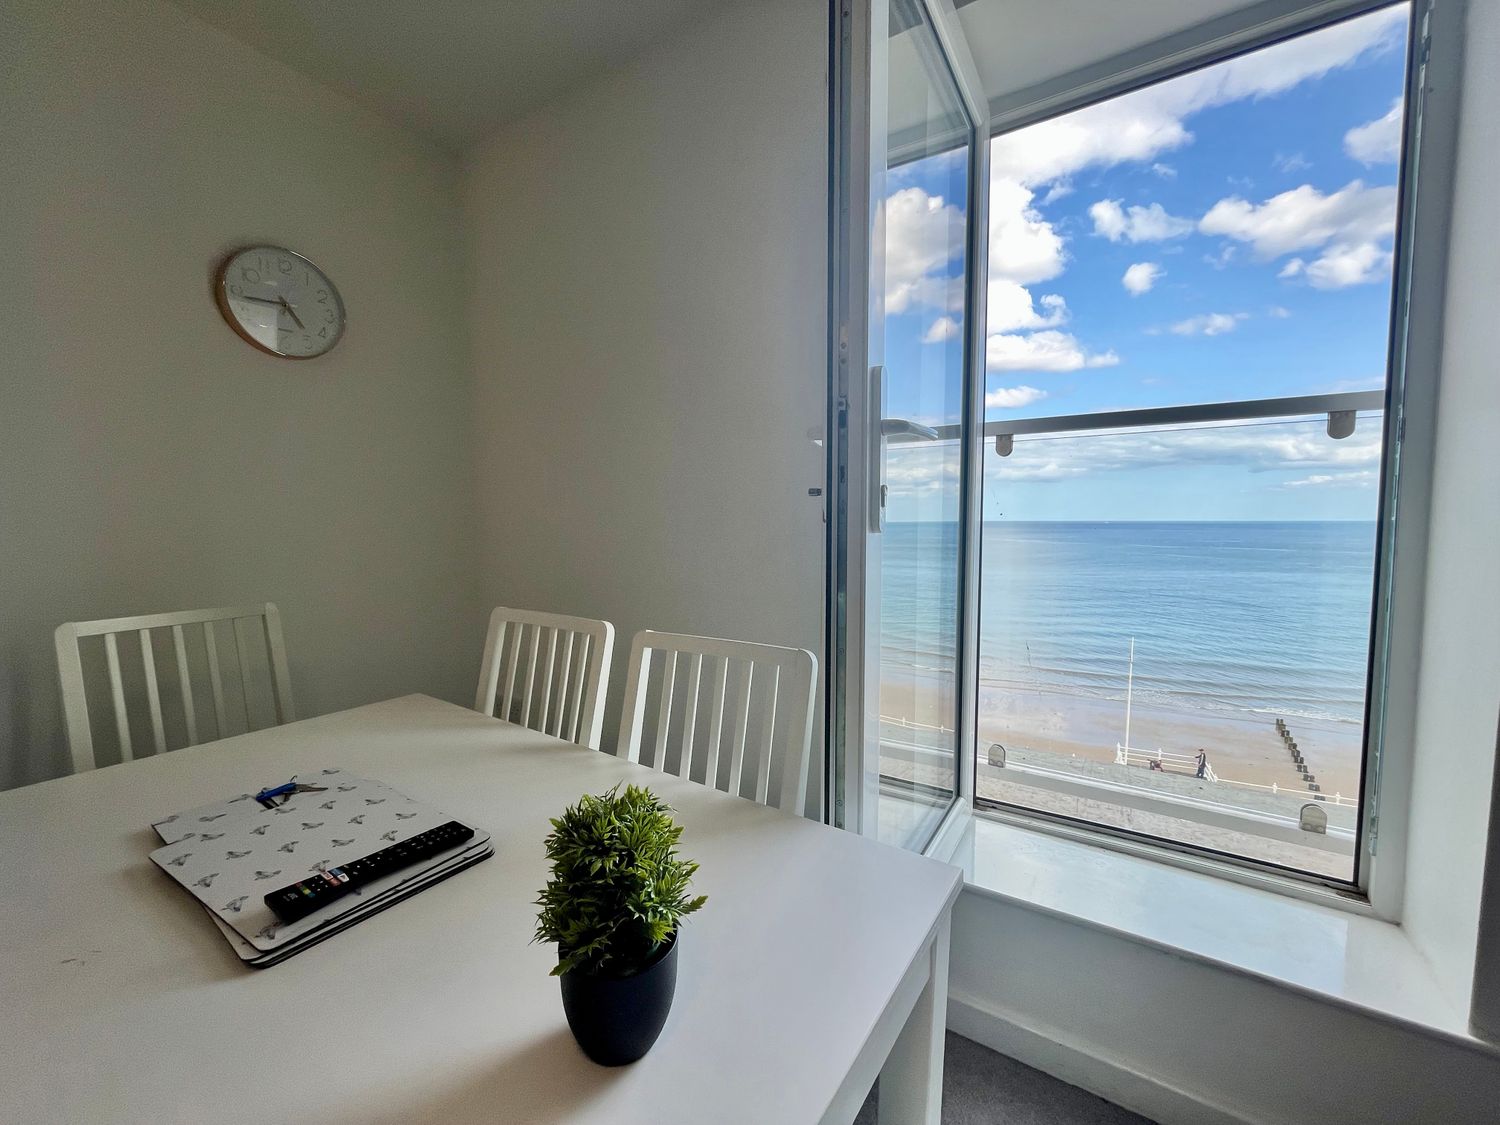 6 Seaview @ Bridlington Bay - North Yorkshire (incl. Whitby) - 1136970 - photo 1